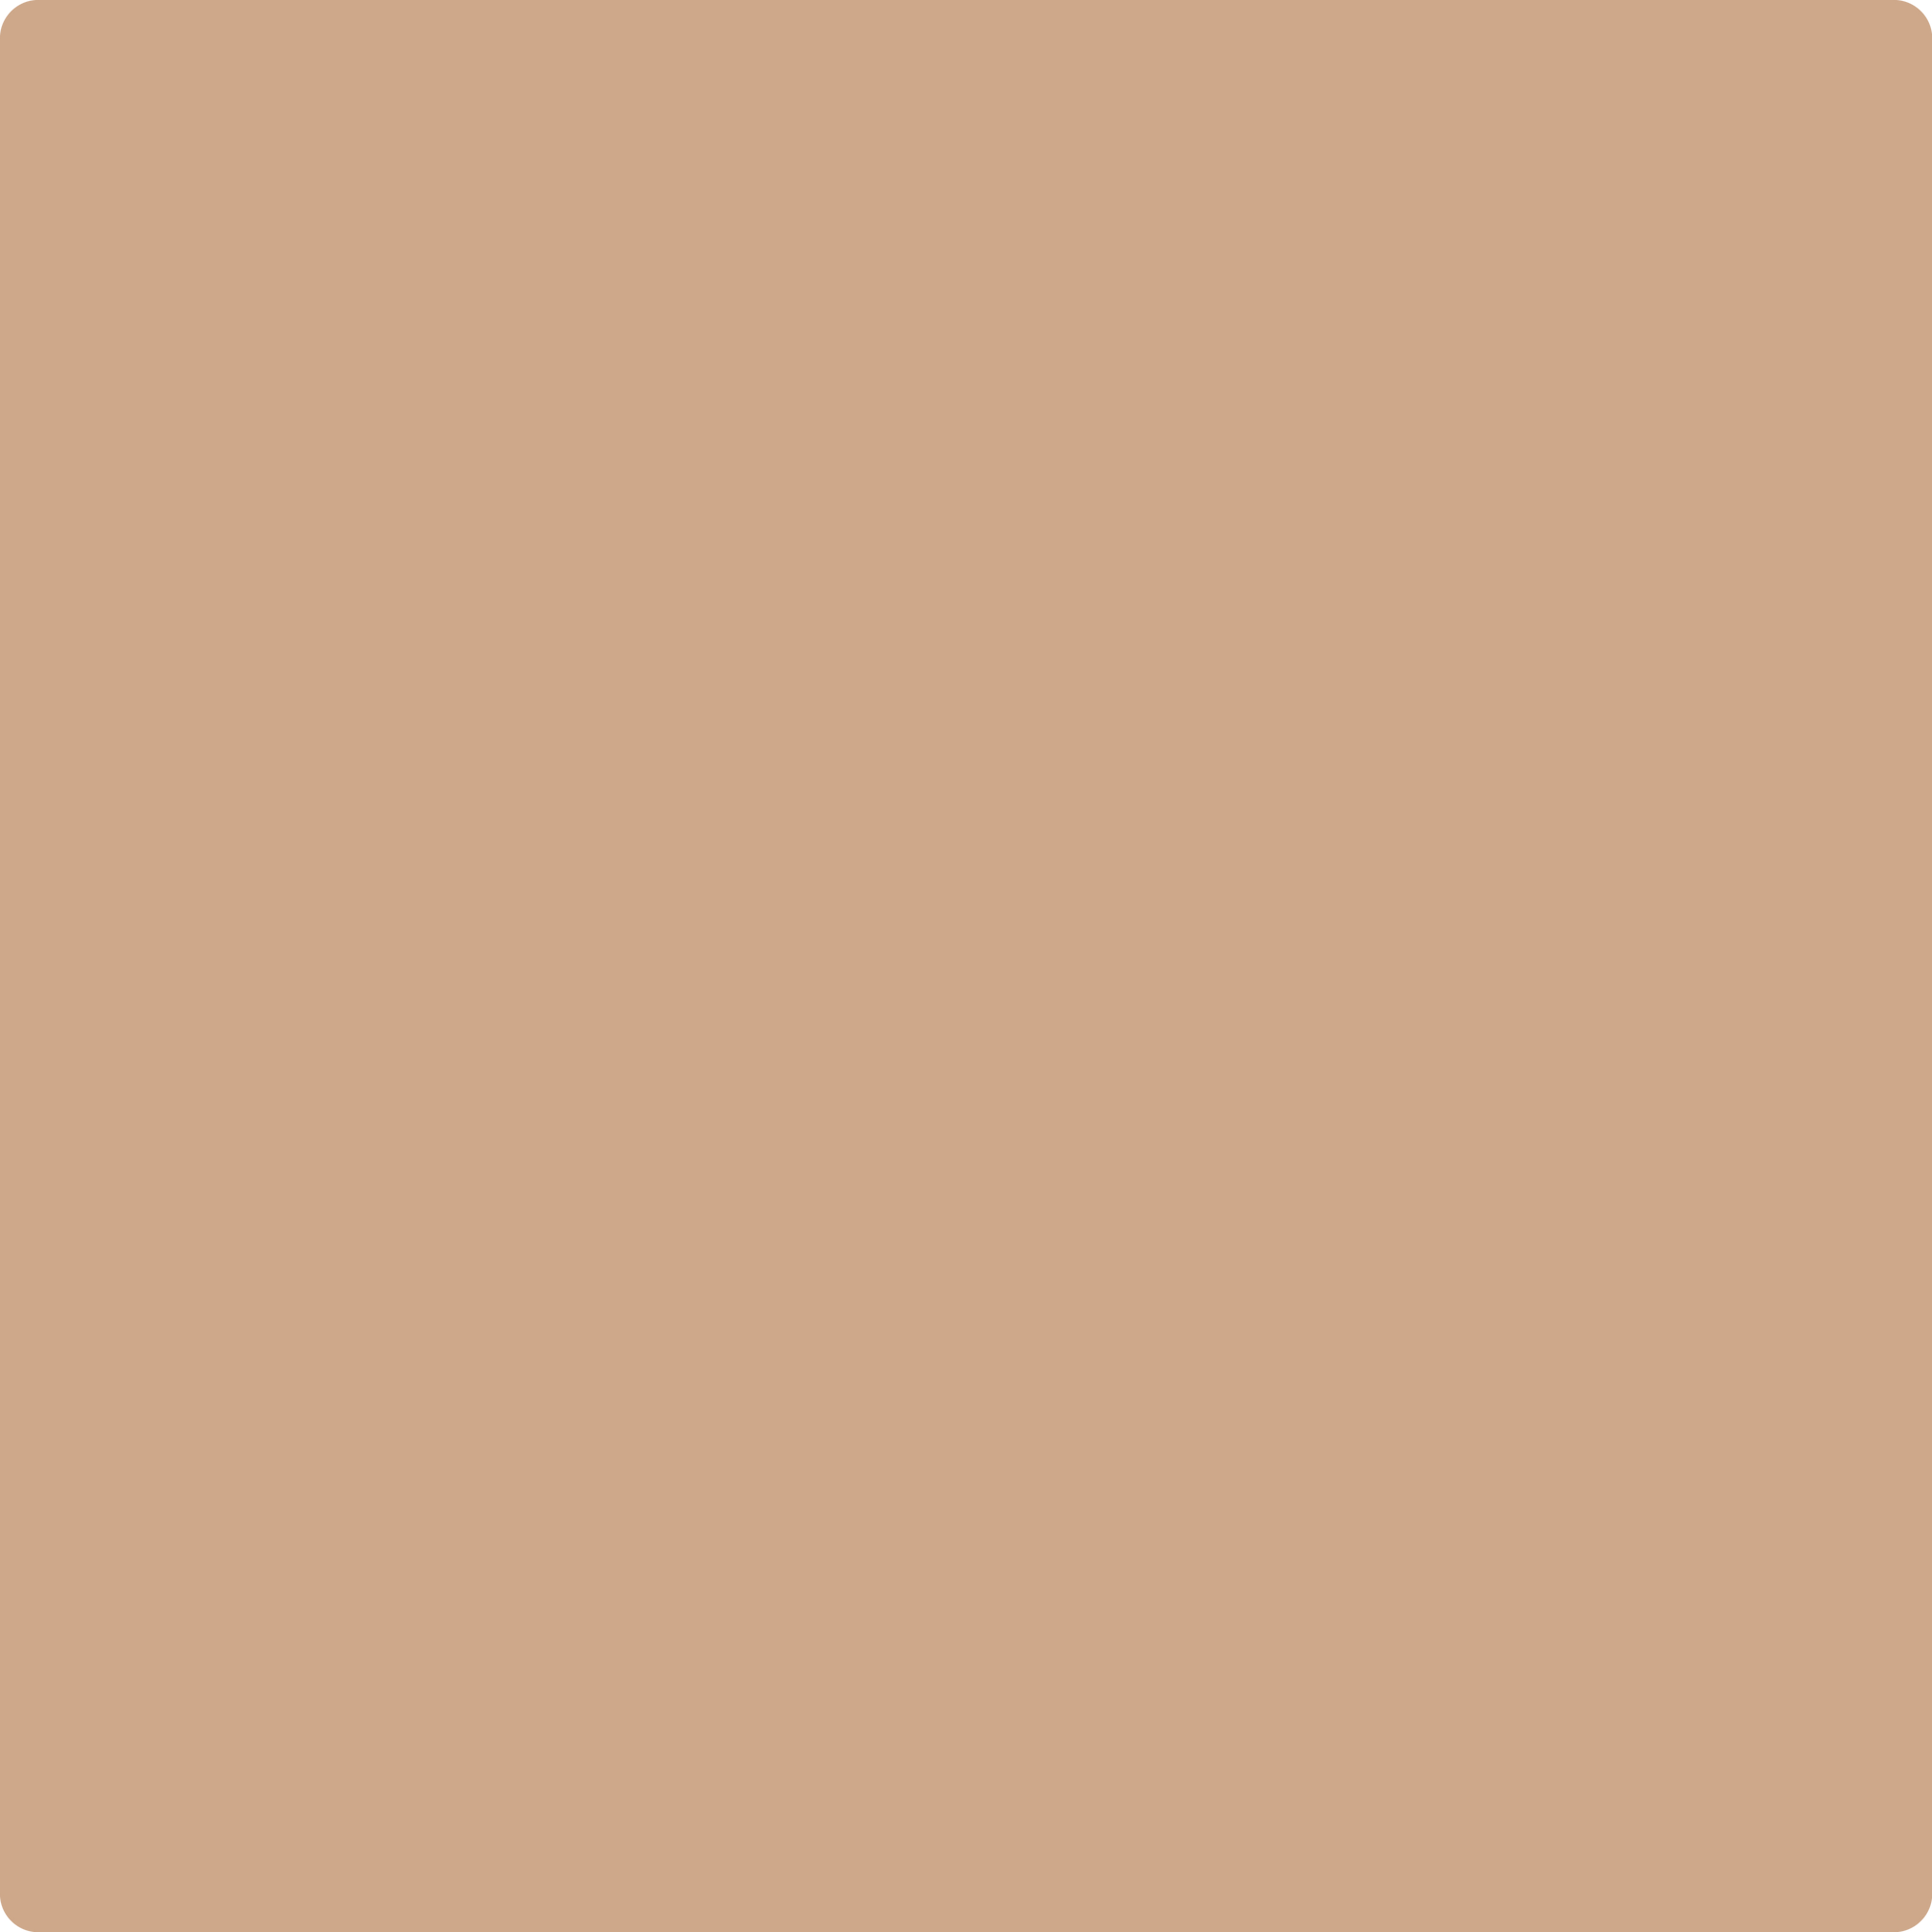 1153 Dearborn Tan a Paint Color by Benjamin Moore